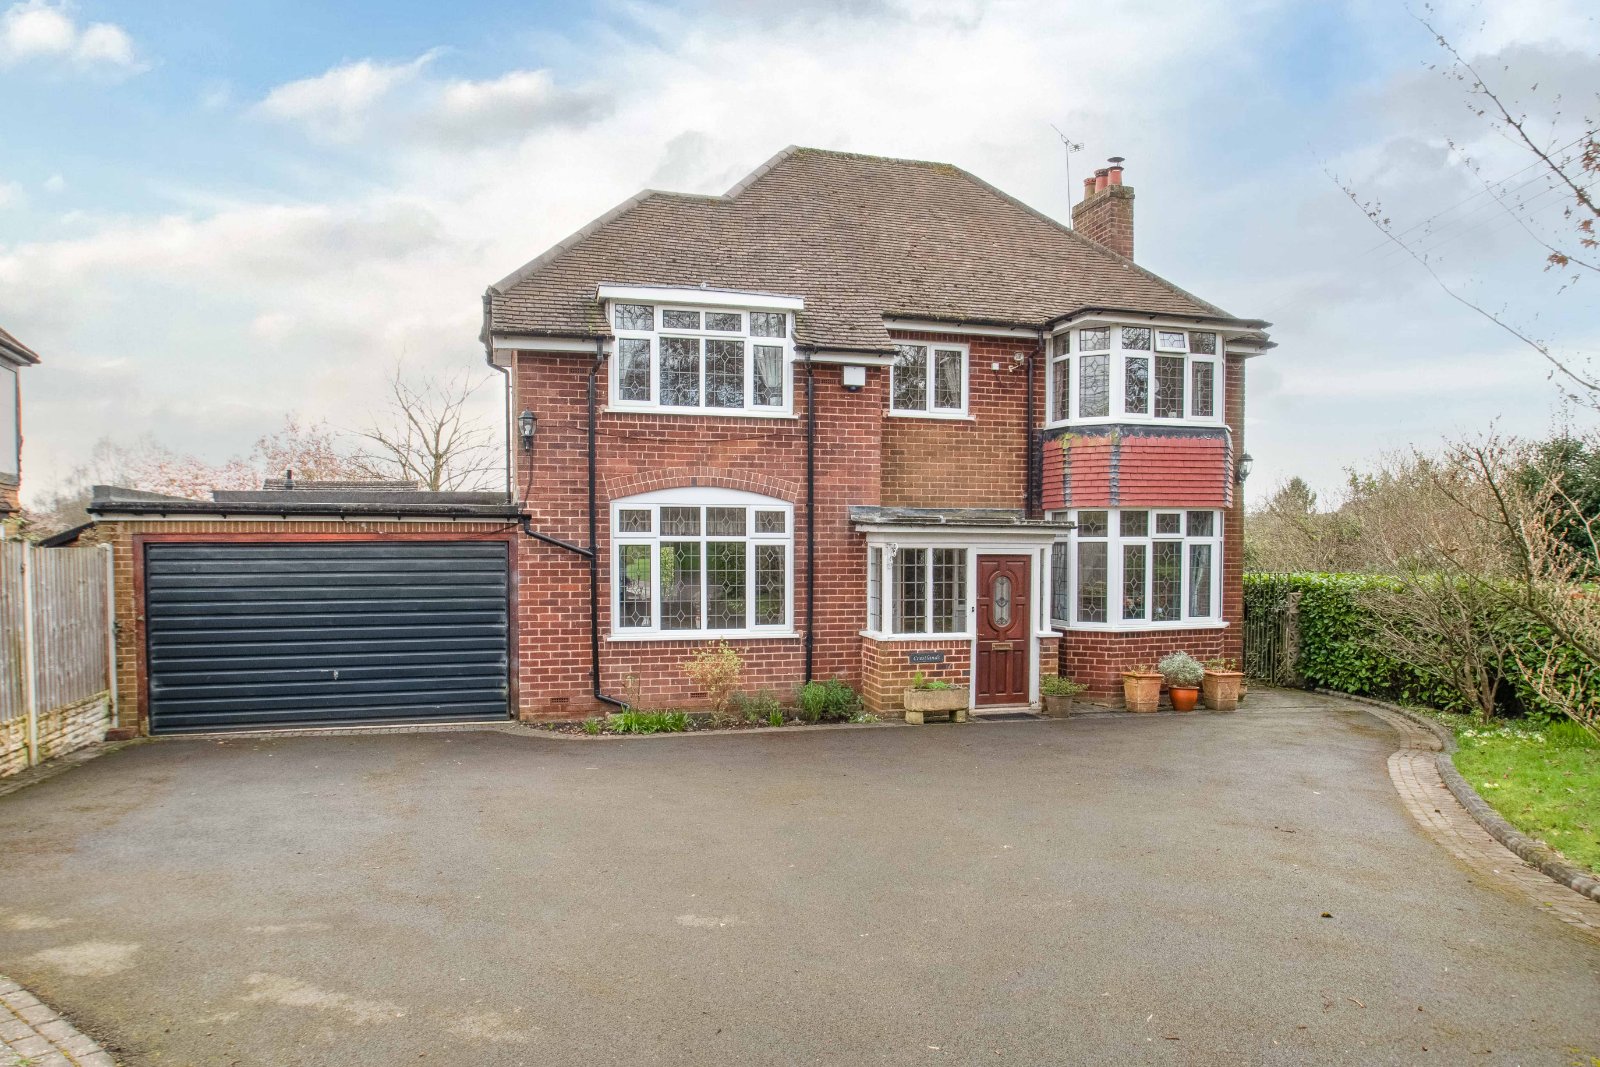 4 bed house for sale in Rowney Green Lane, Rowney Green  - Property Image 1